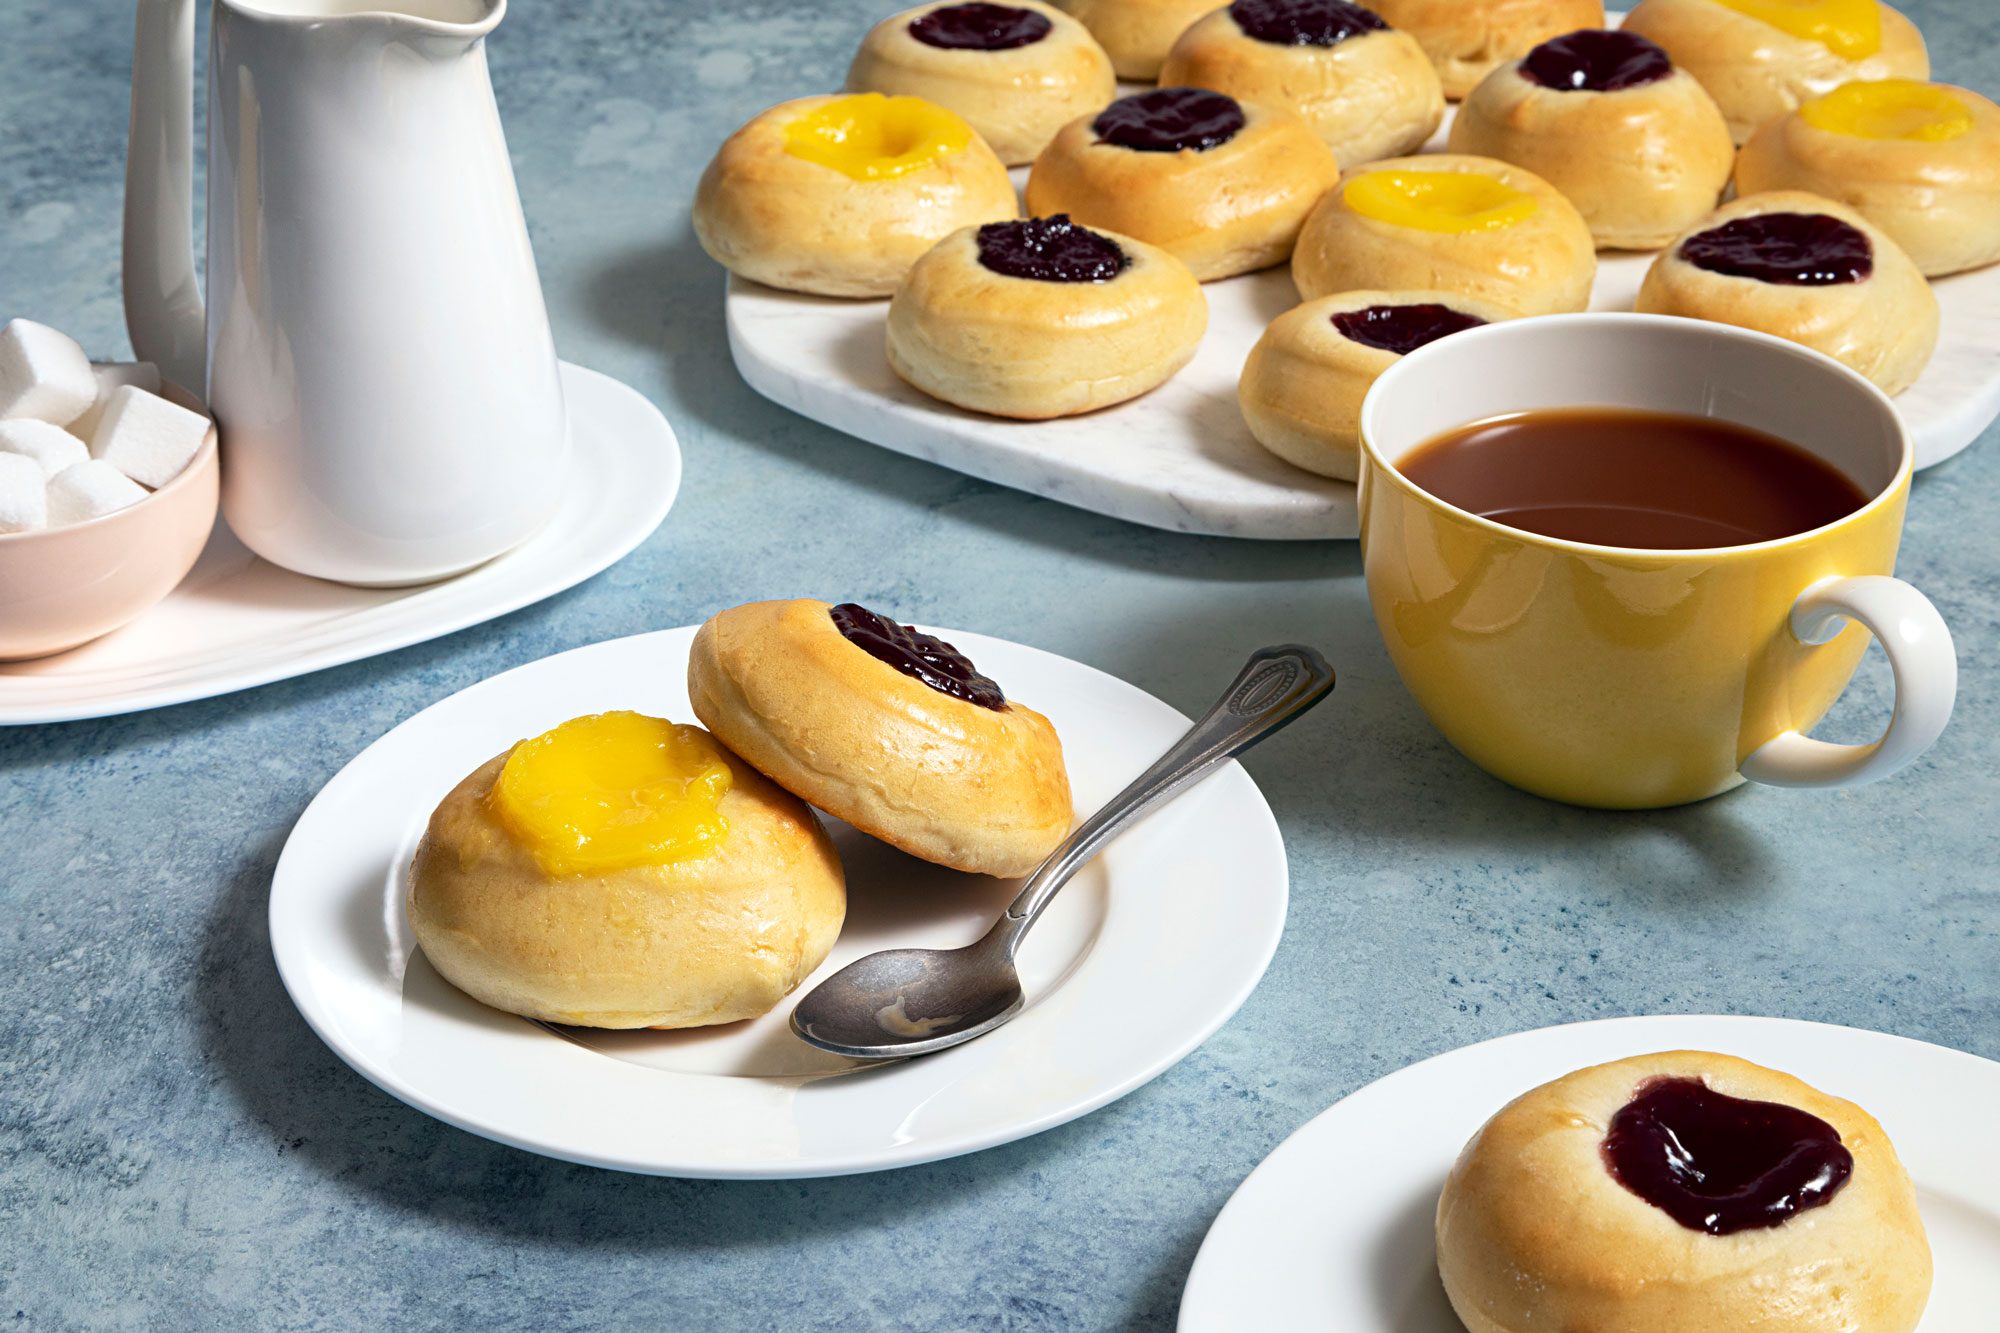 Kolaches served on a small plate with a spoon and a cup of hot chocolate placed next to it